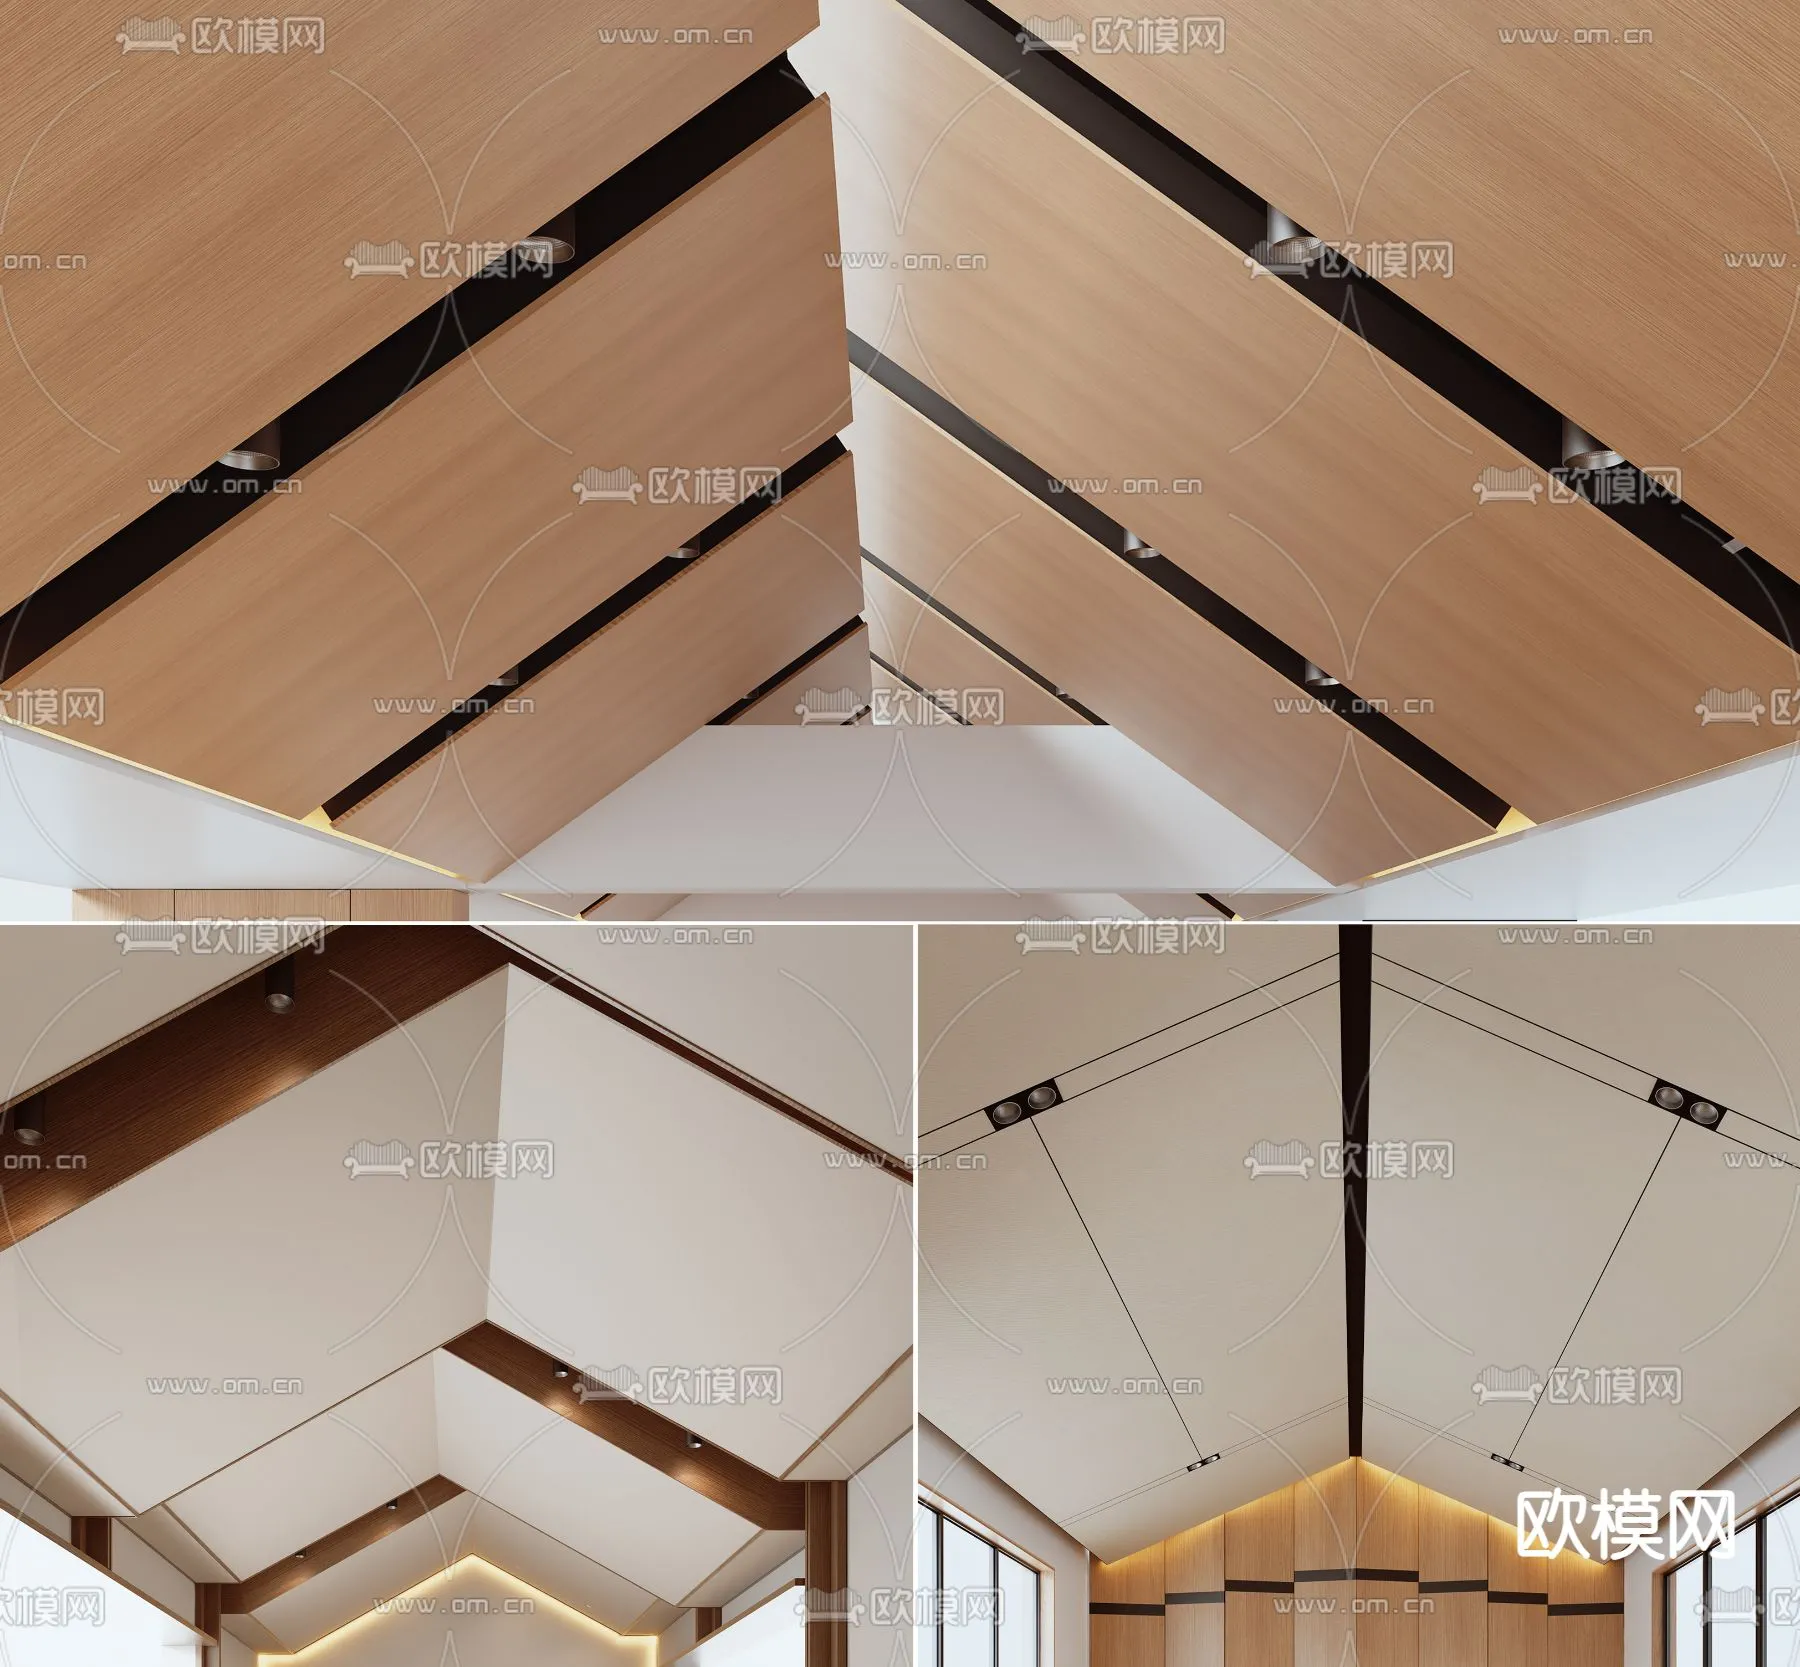 3DS MAX – DETAIL – CEILING – VRAY / CORONA – 3D MODEL – 3209